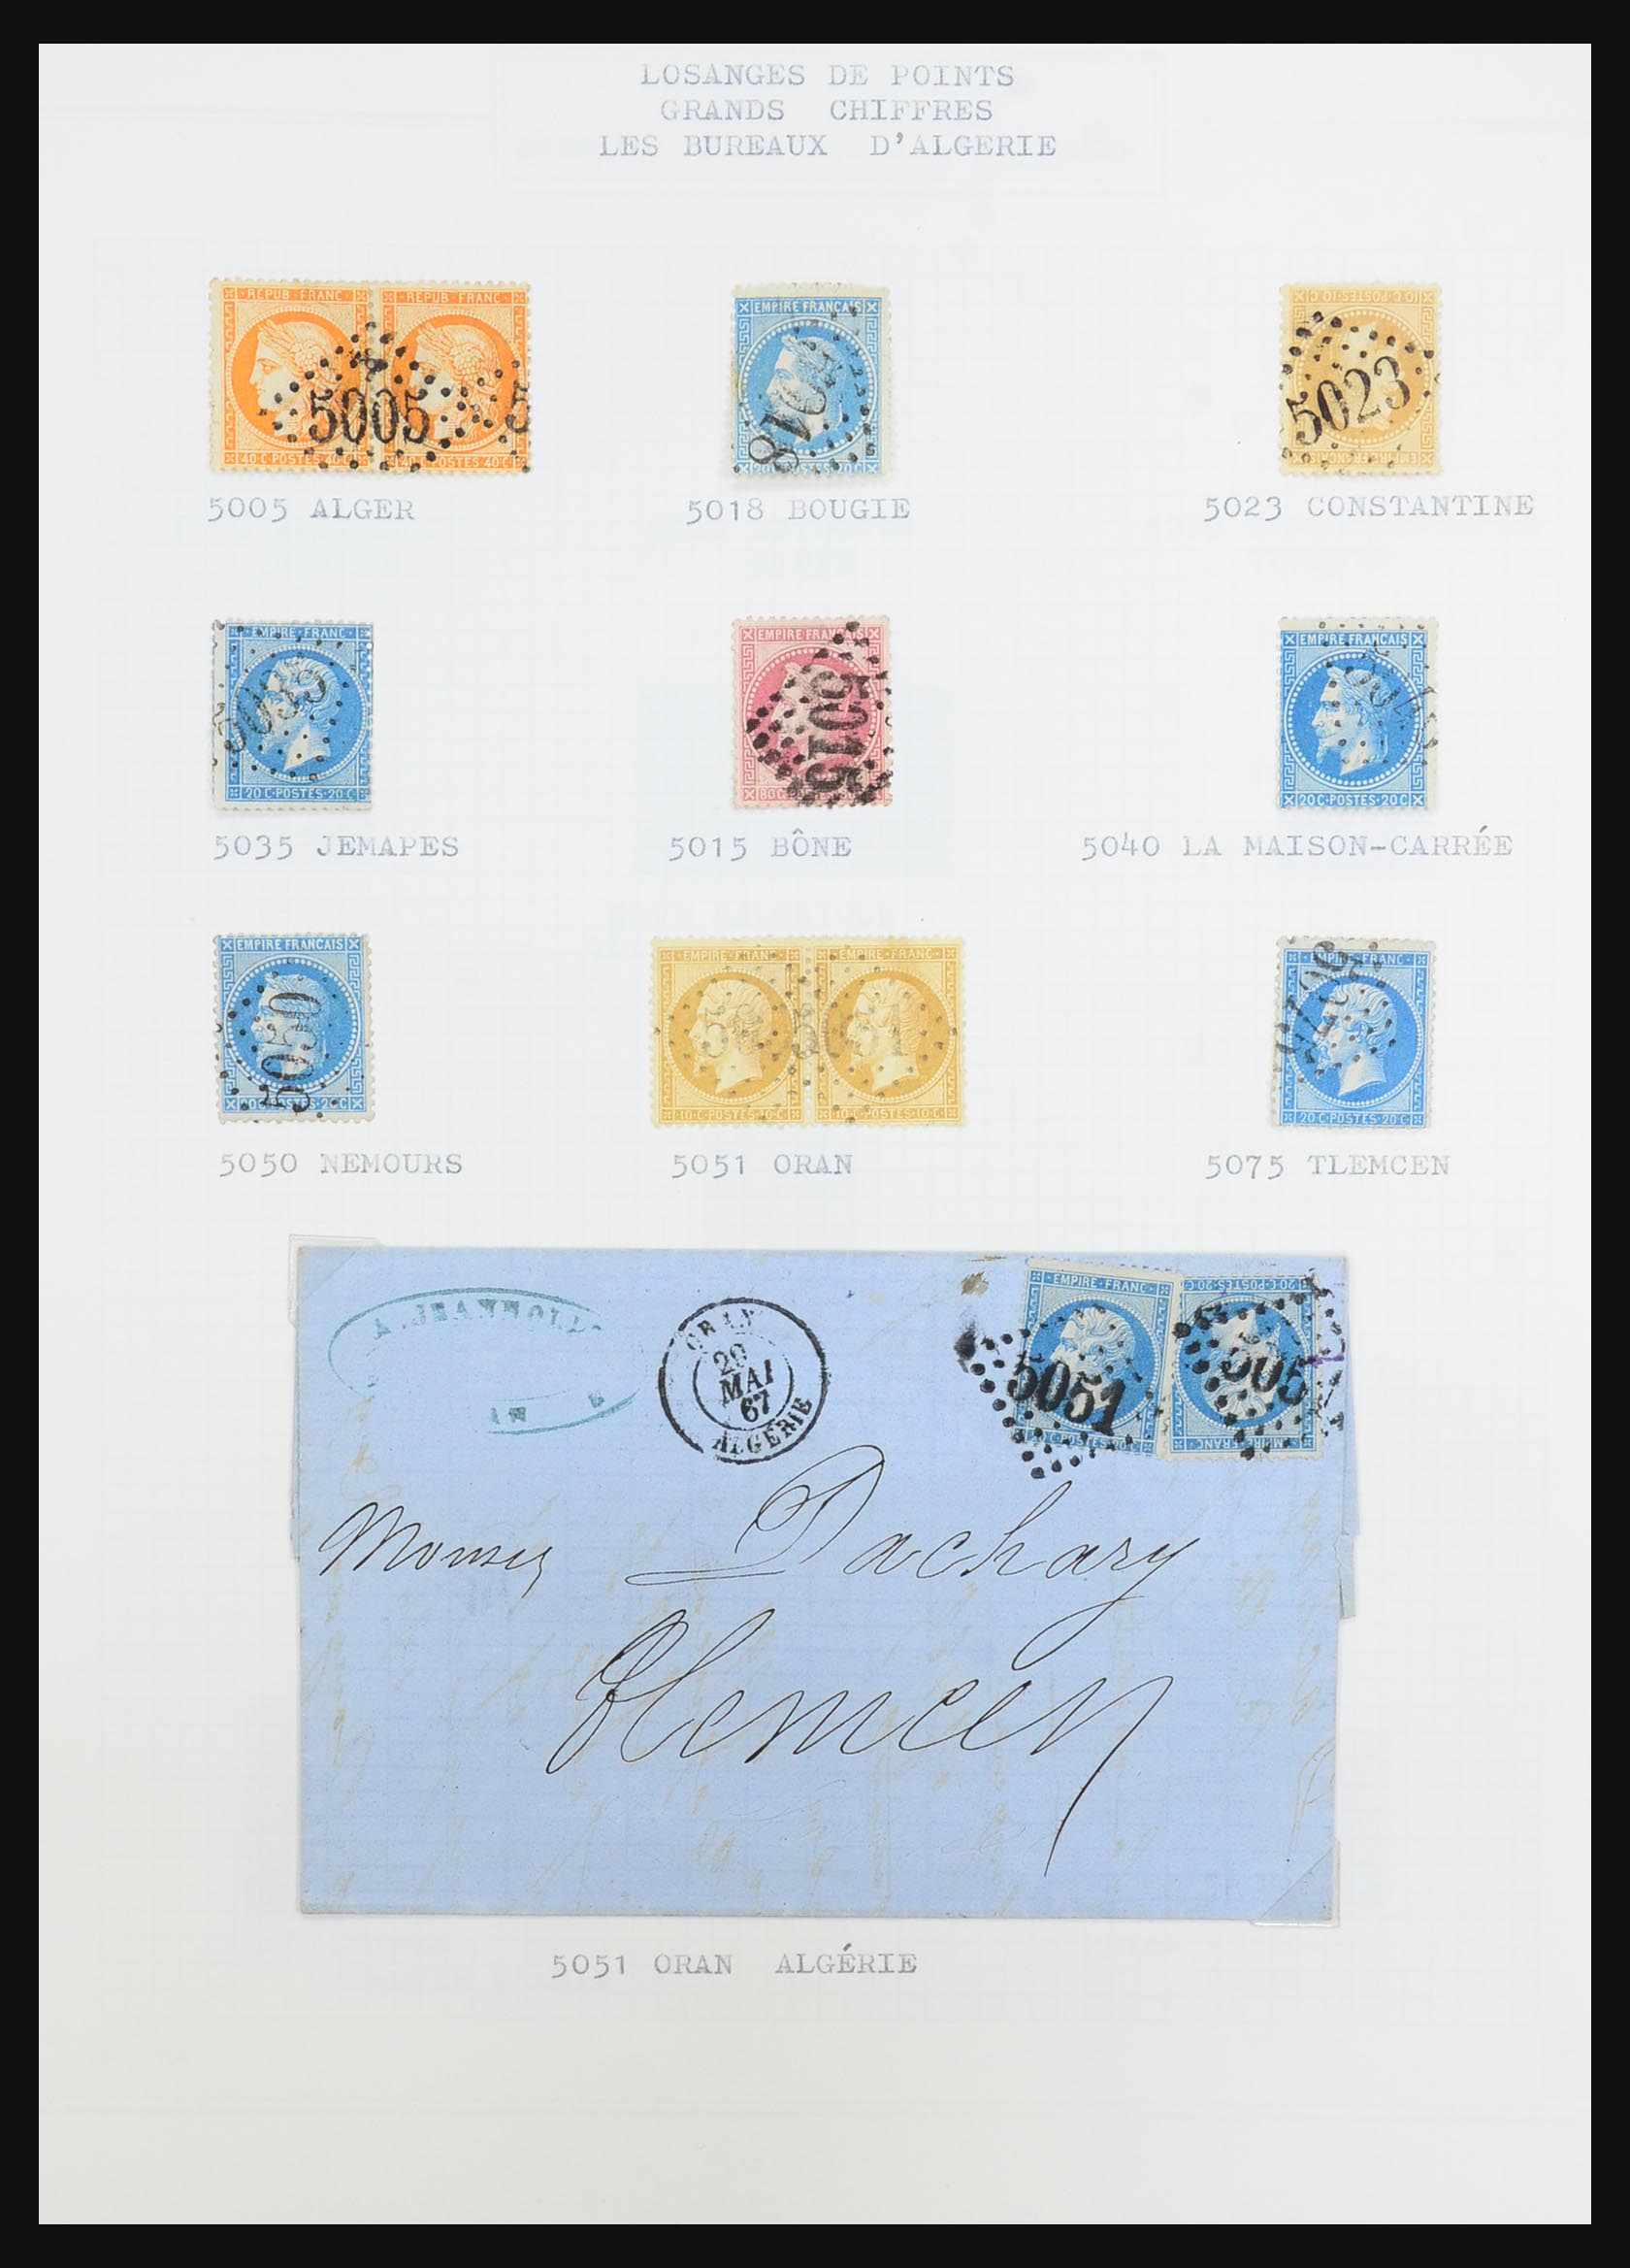 31526 044 - 31526 France covers and cancels 1725 (!)-1900.